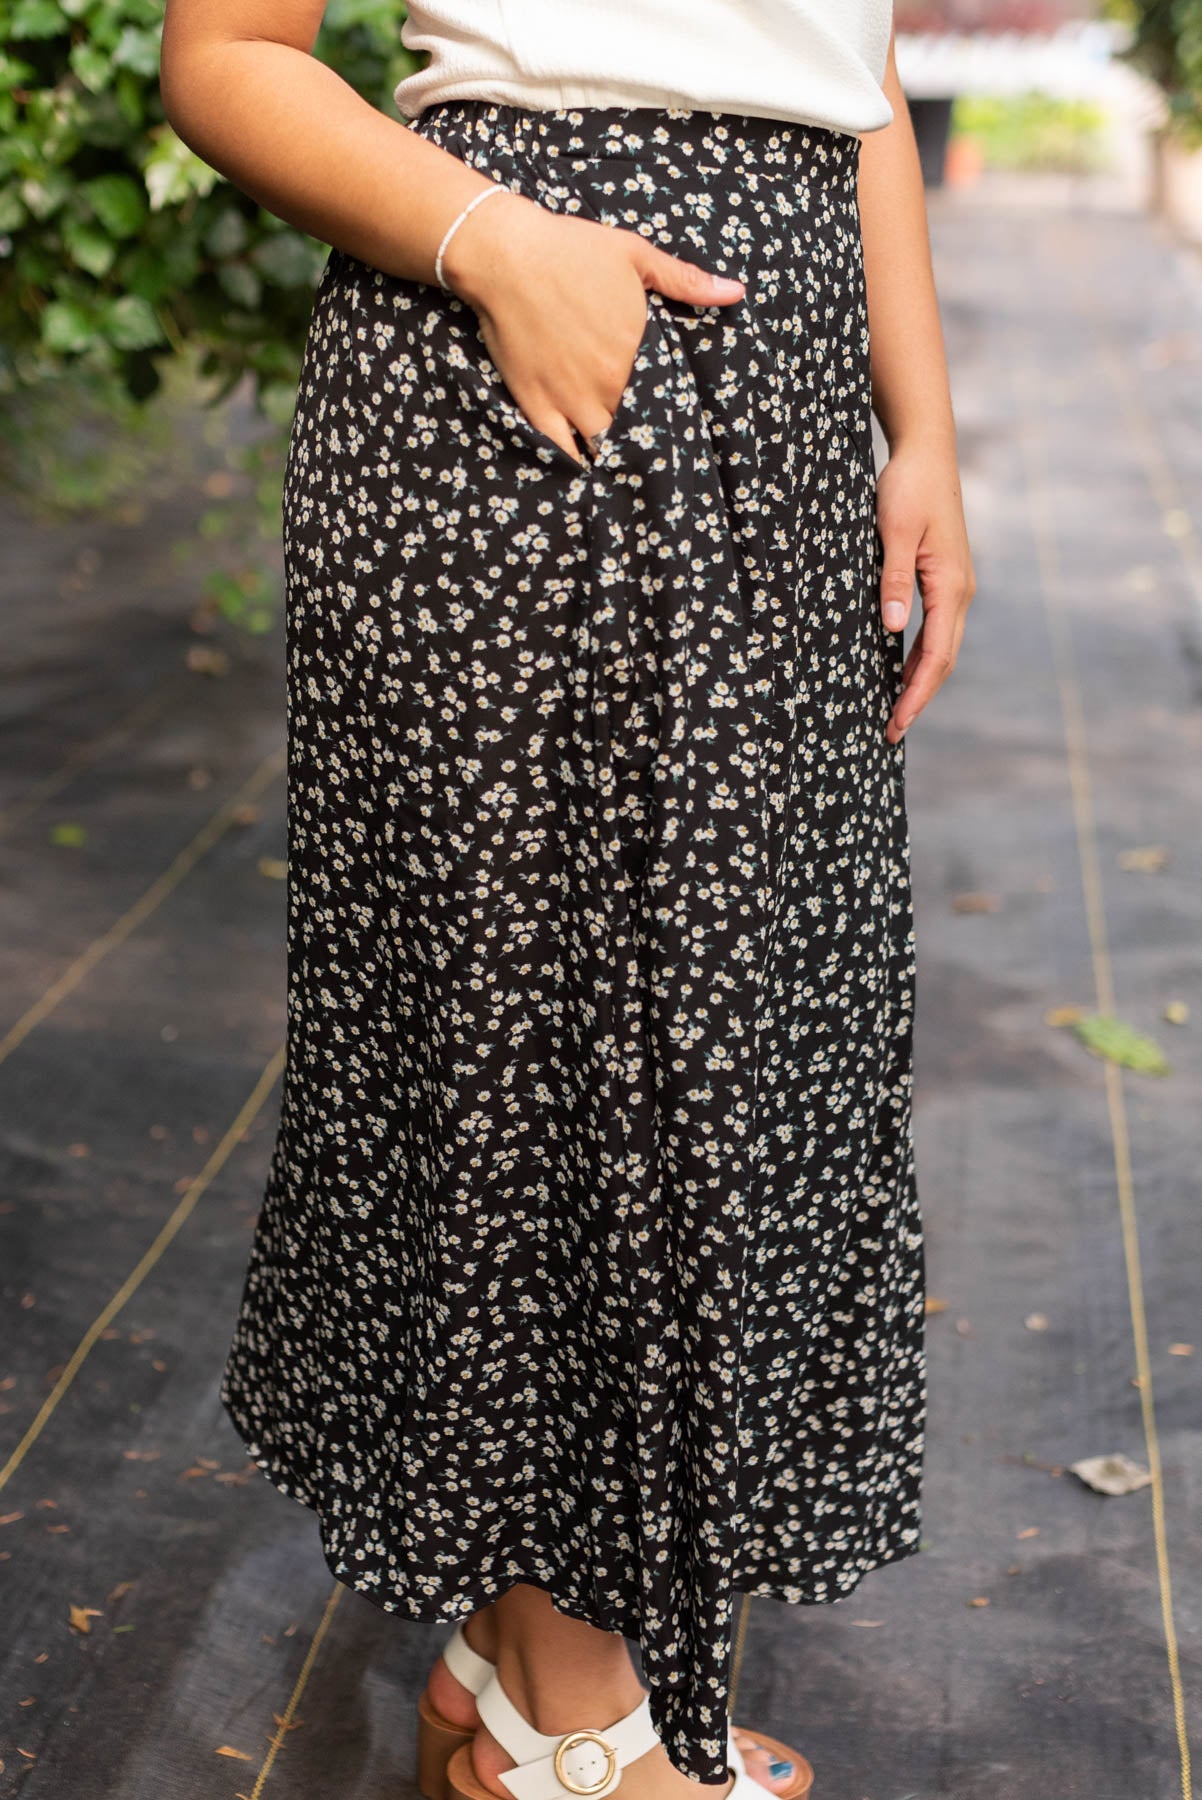 Side view of the black daisy skirt with pockets